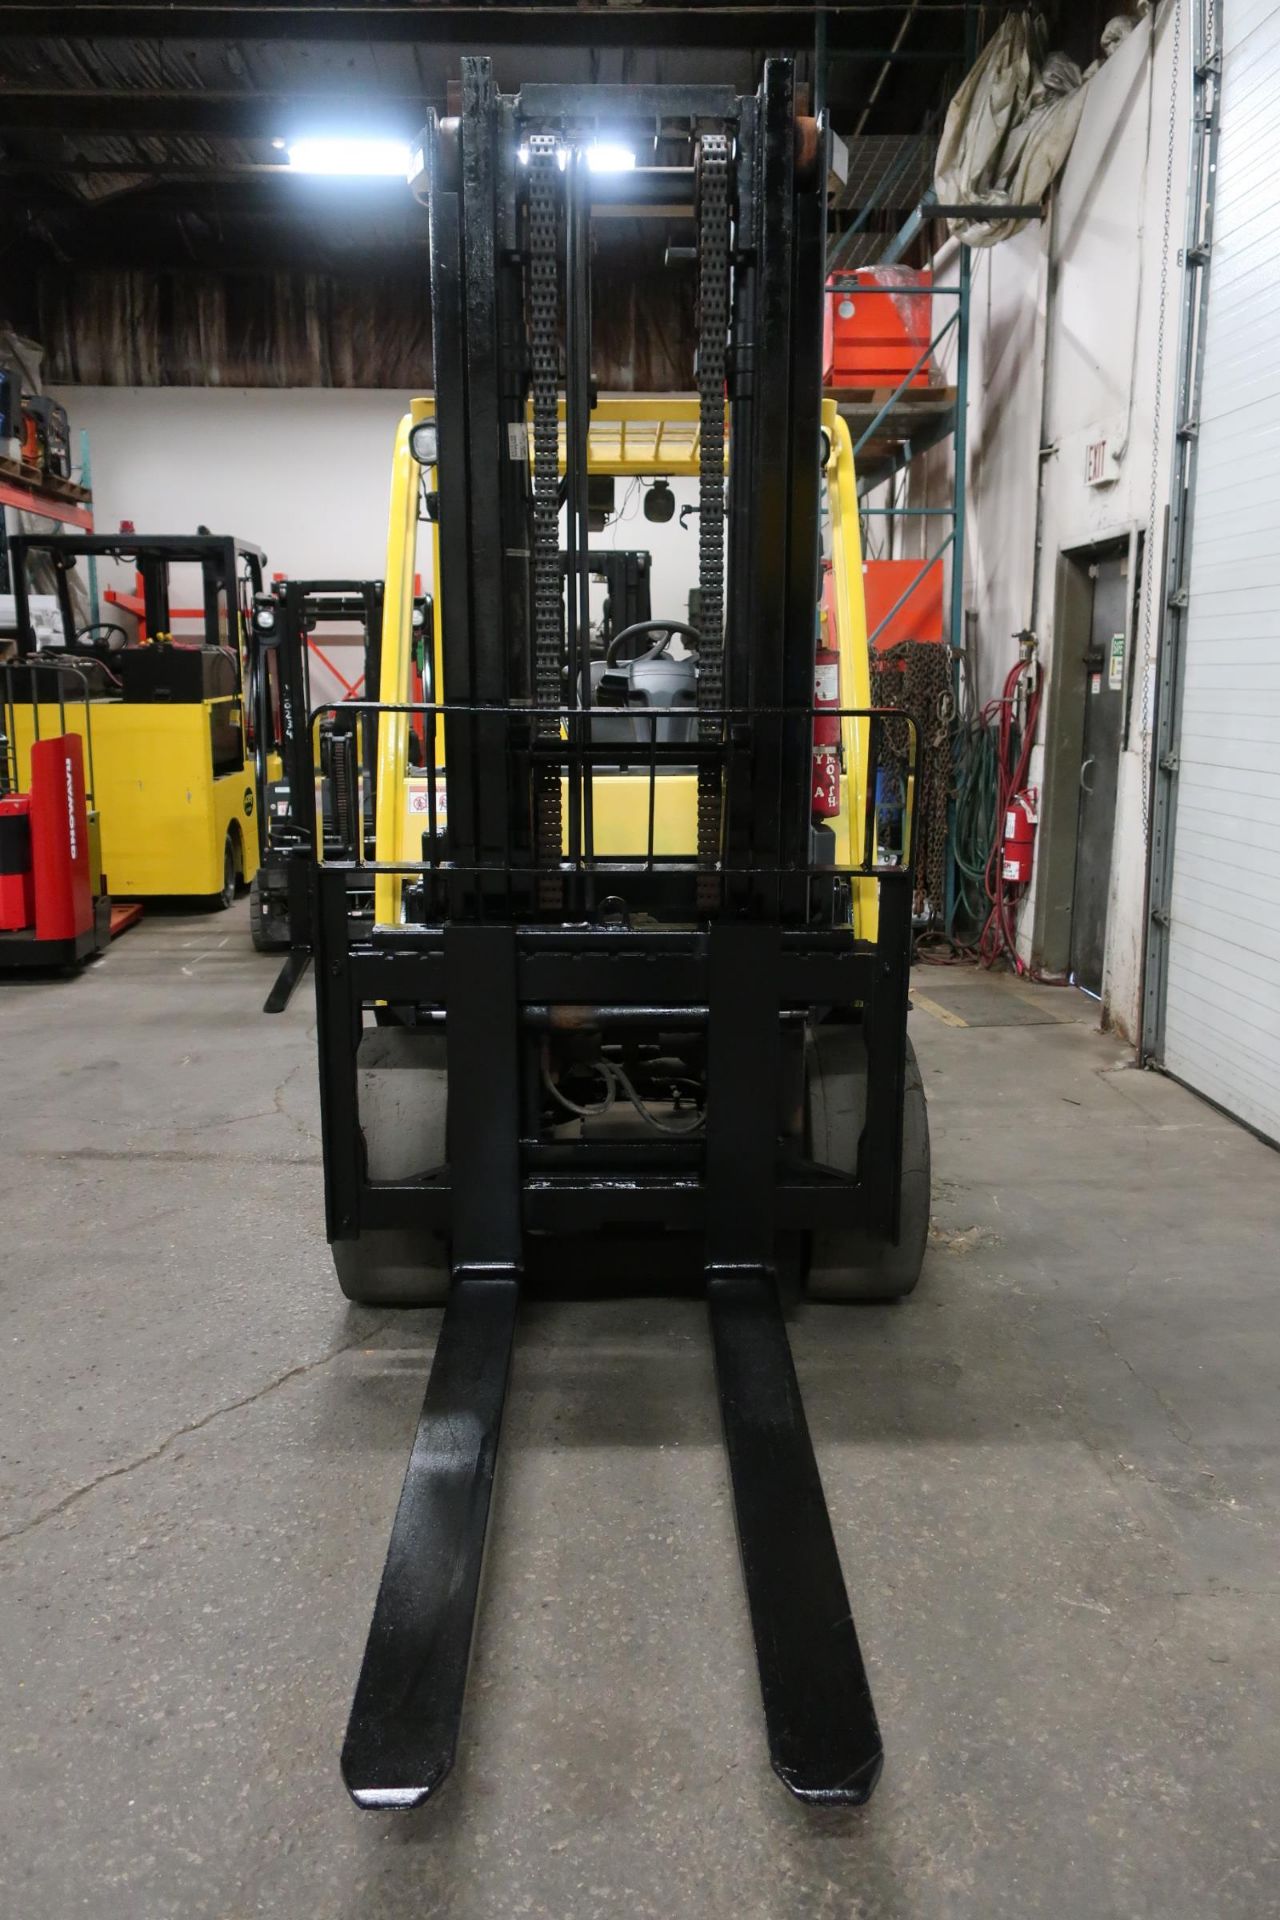 FREE CUSTOMS - 2014 Hyster 15500lbs Capacity Forklift with VERY LOW HOURS & 58" forks - Diesel - Image 2 of 2